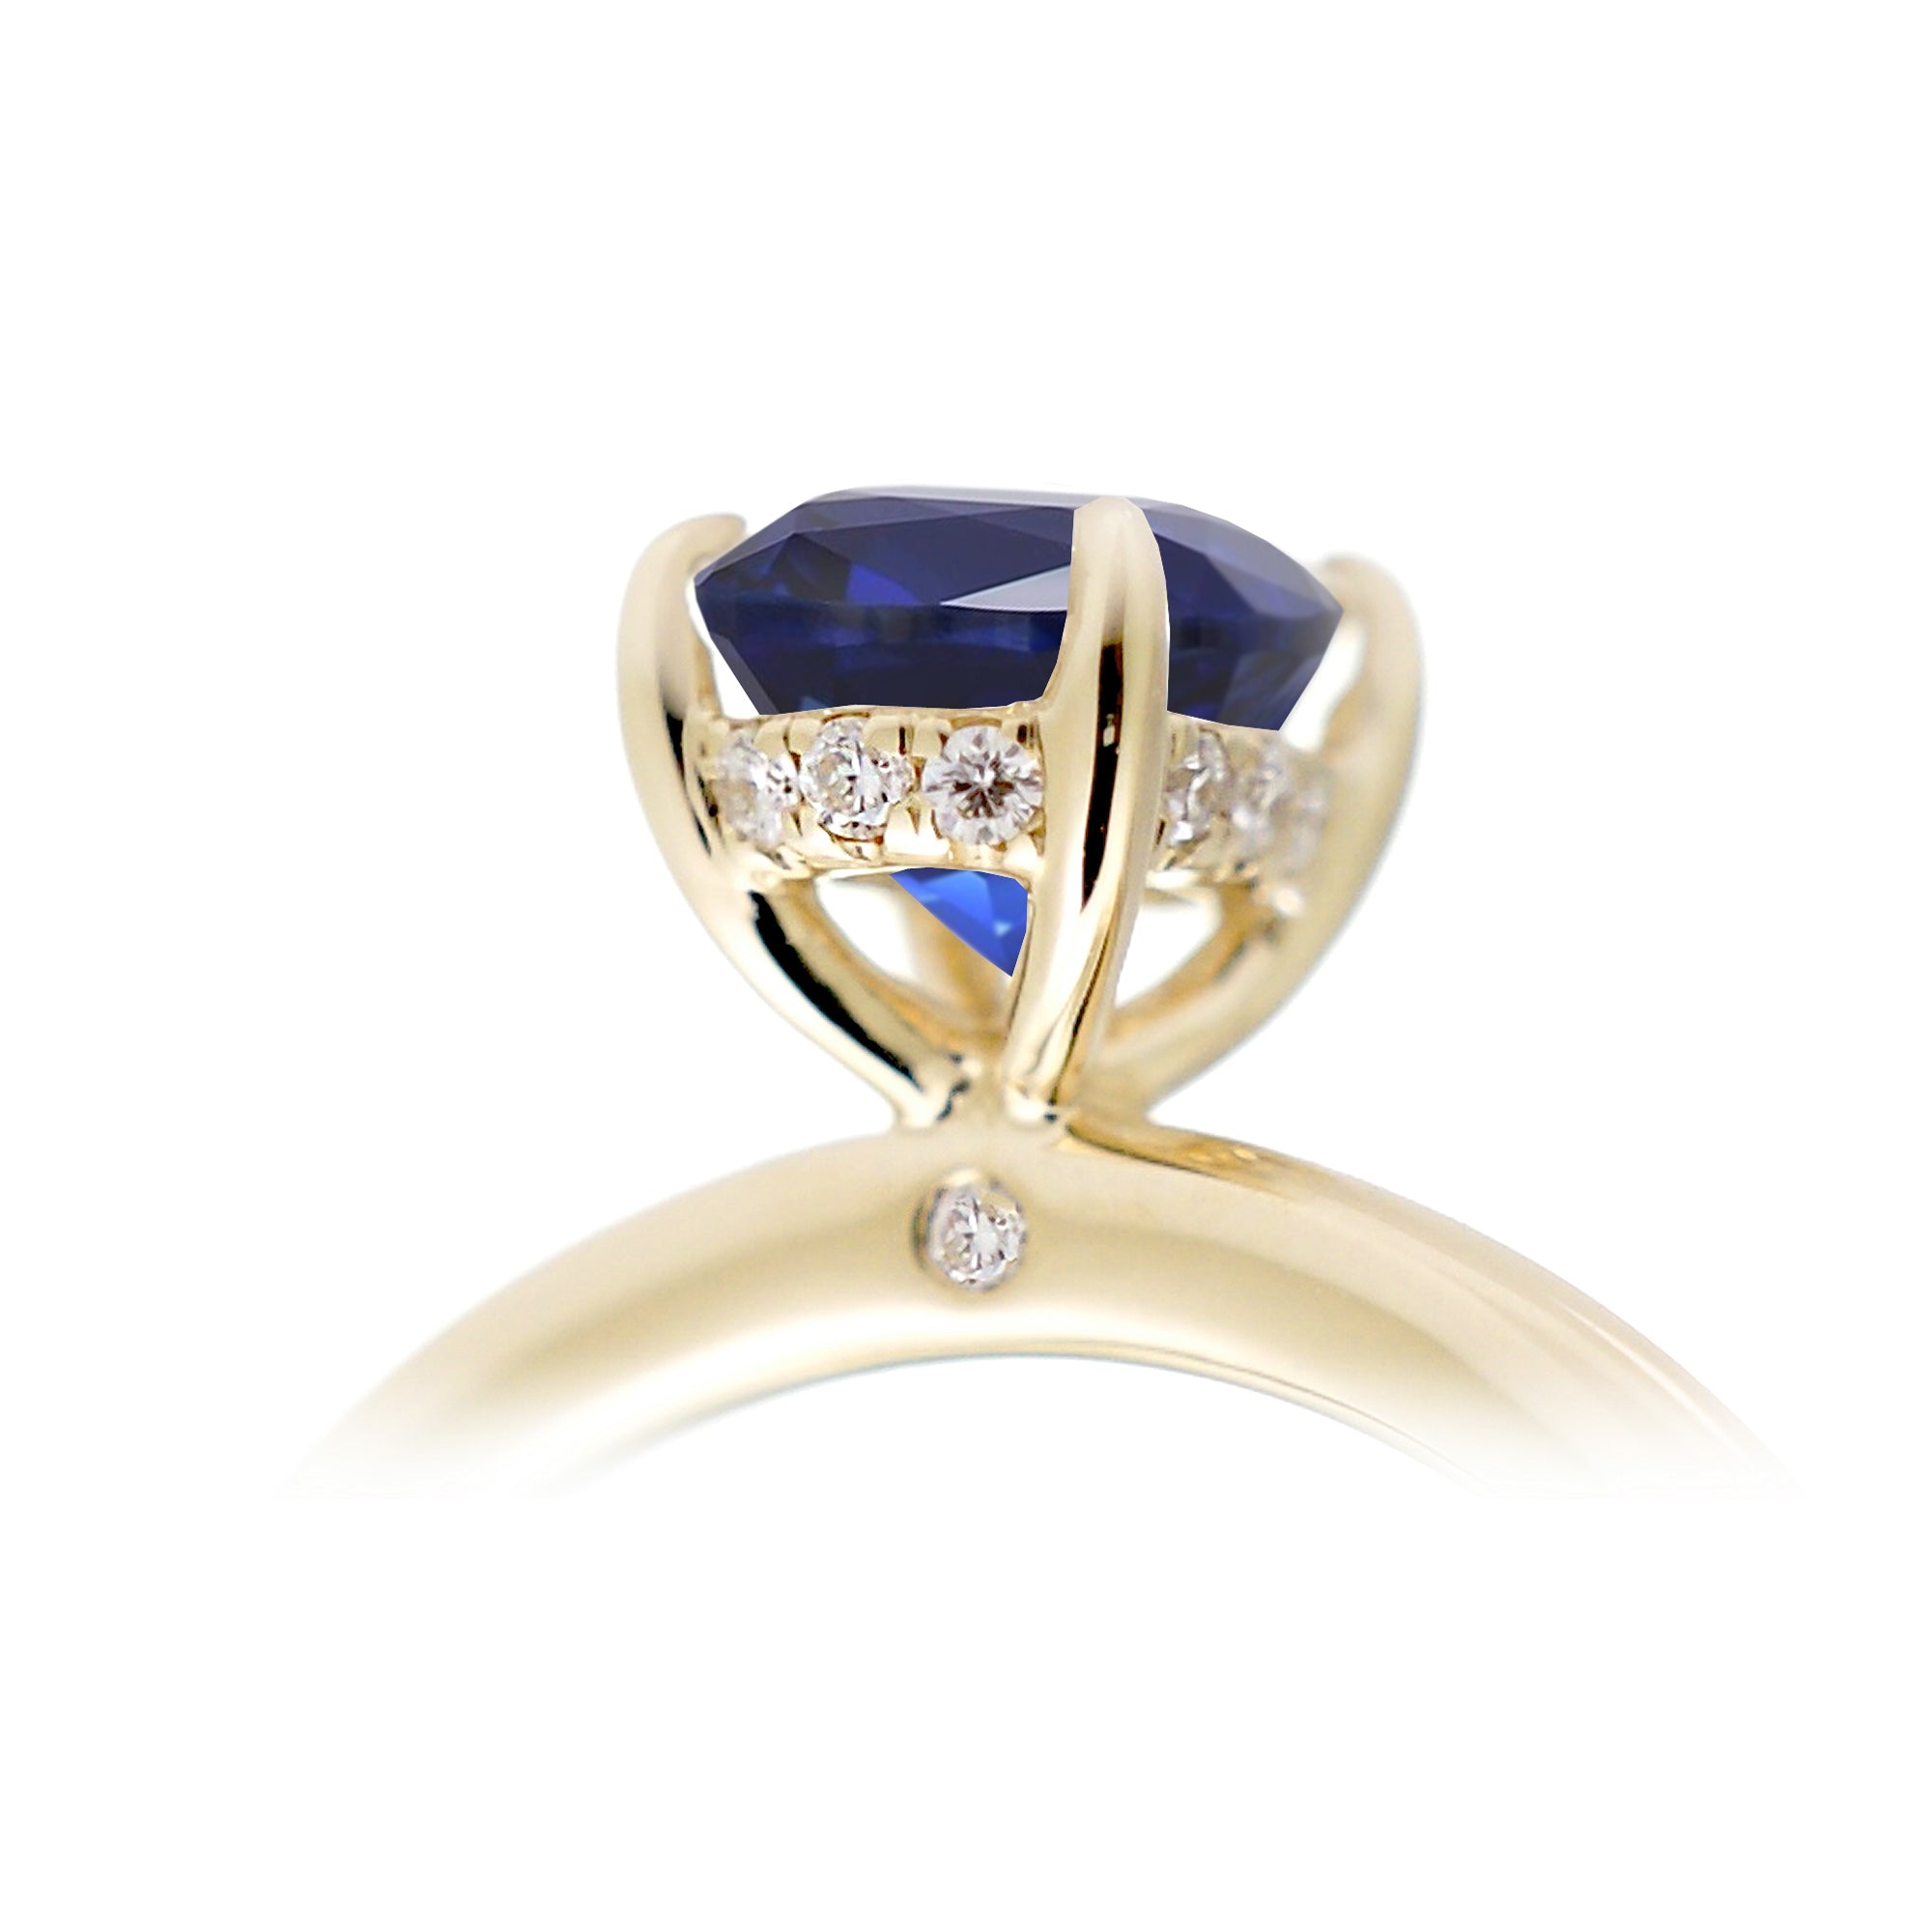 The Lucy Emerald Step Cut Sapphire Ring (Lab-Grown)